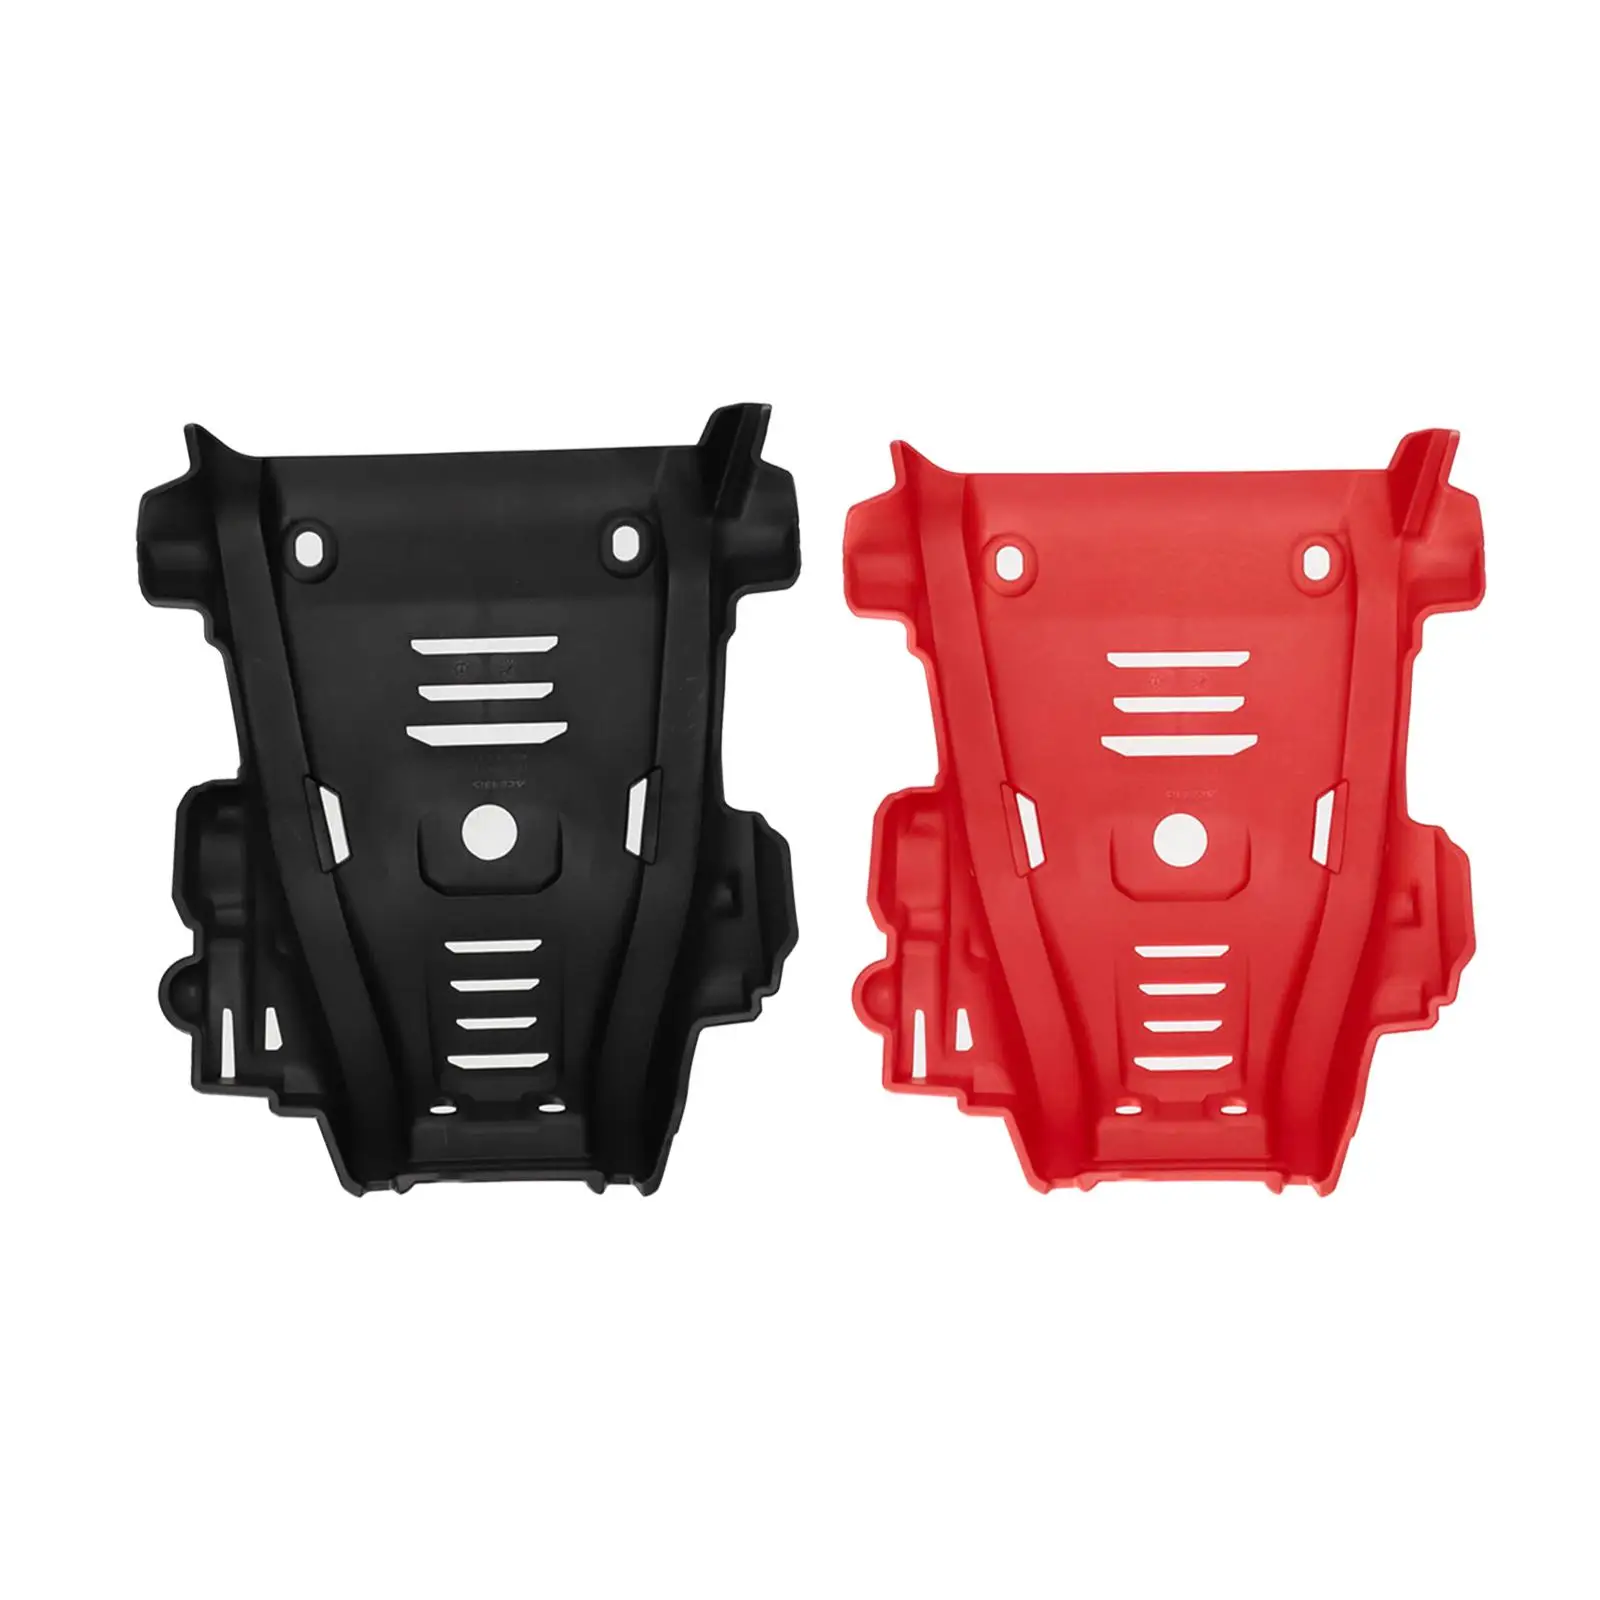  Engine Base Chassis Guard Plate Protective Cover for Crf300L